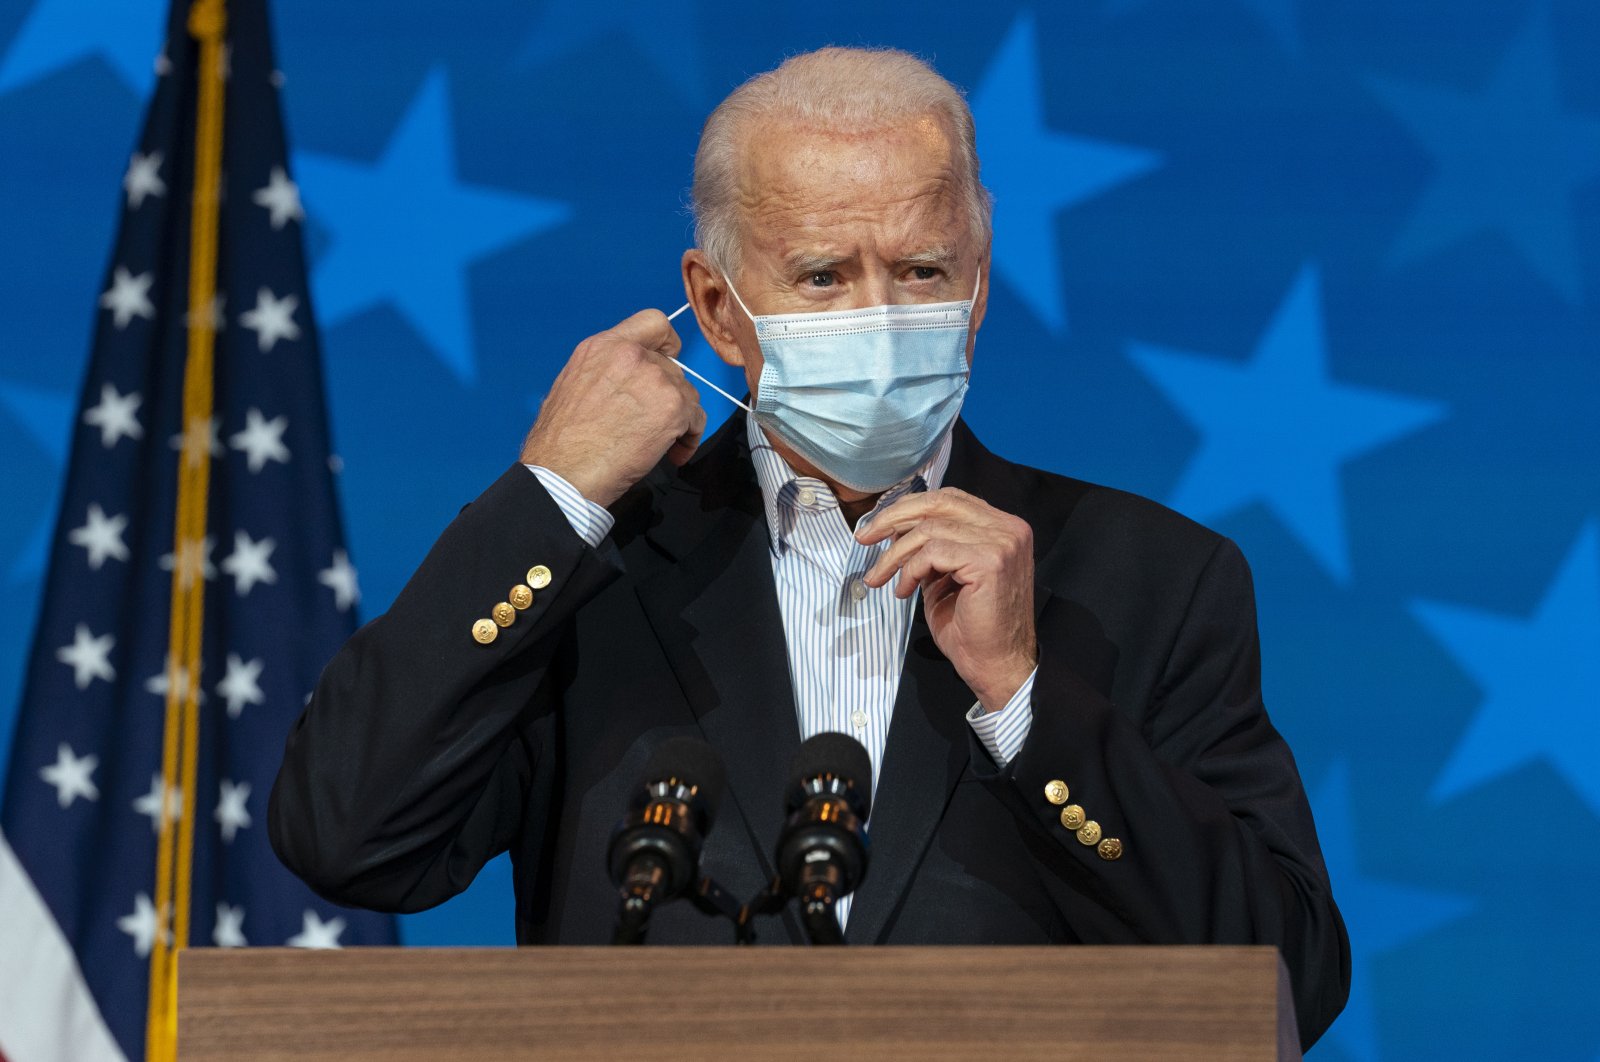 Democratic presidential candidate former Vice President Joe Biden removes his face mask to speak at The Queen theater, in Wilmington, Delaware, Nov. 5, 2020. (AP Photo)